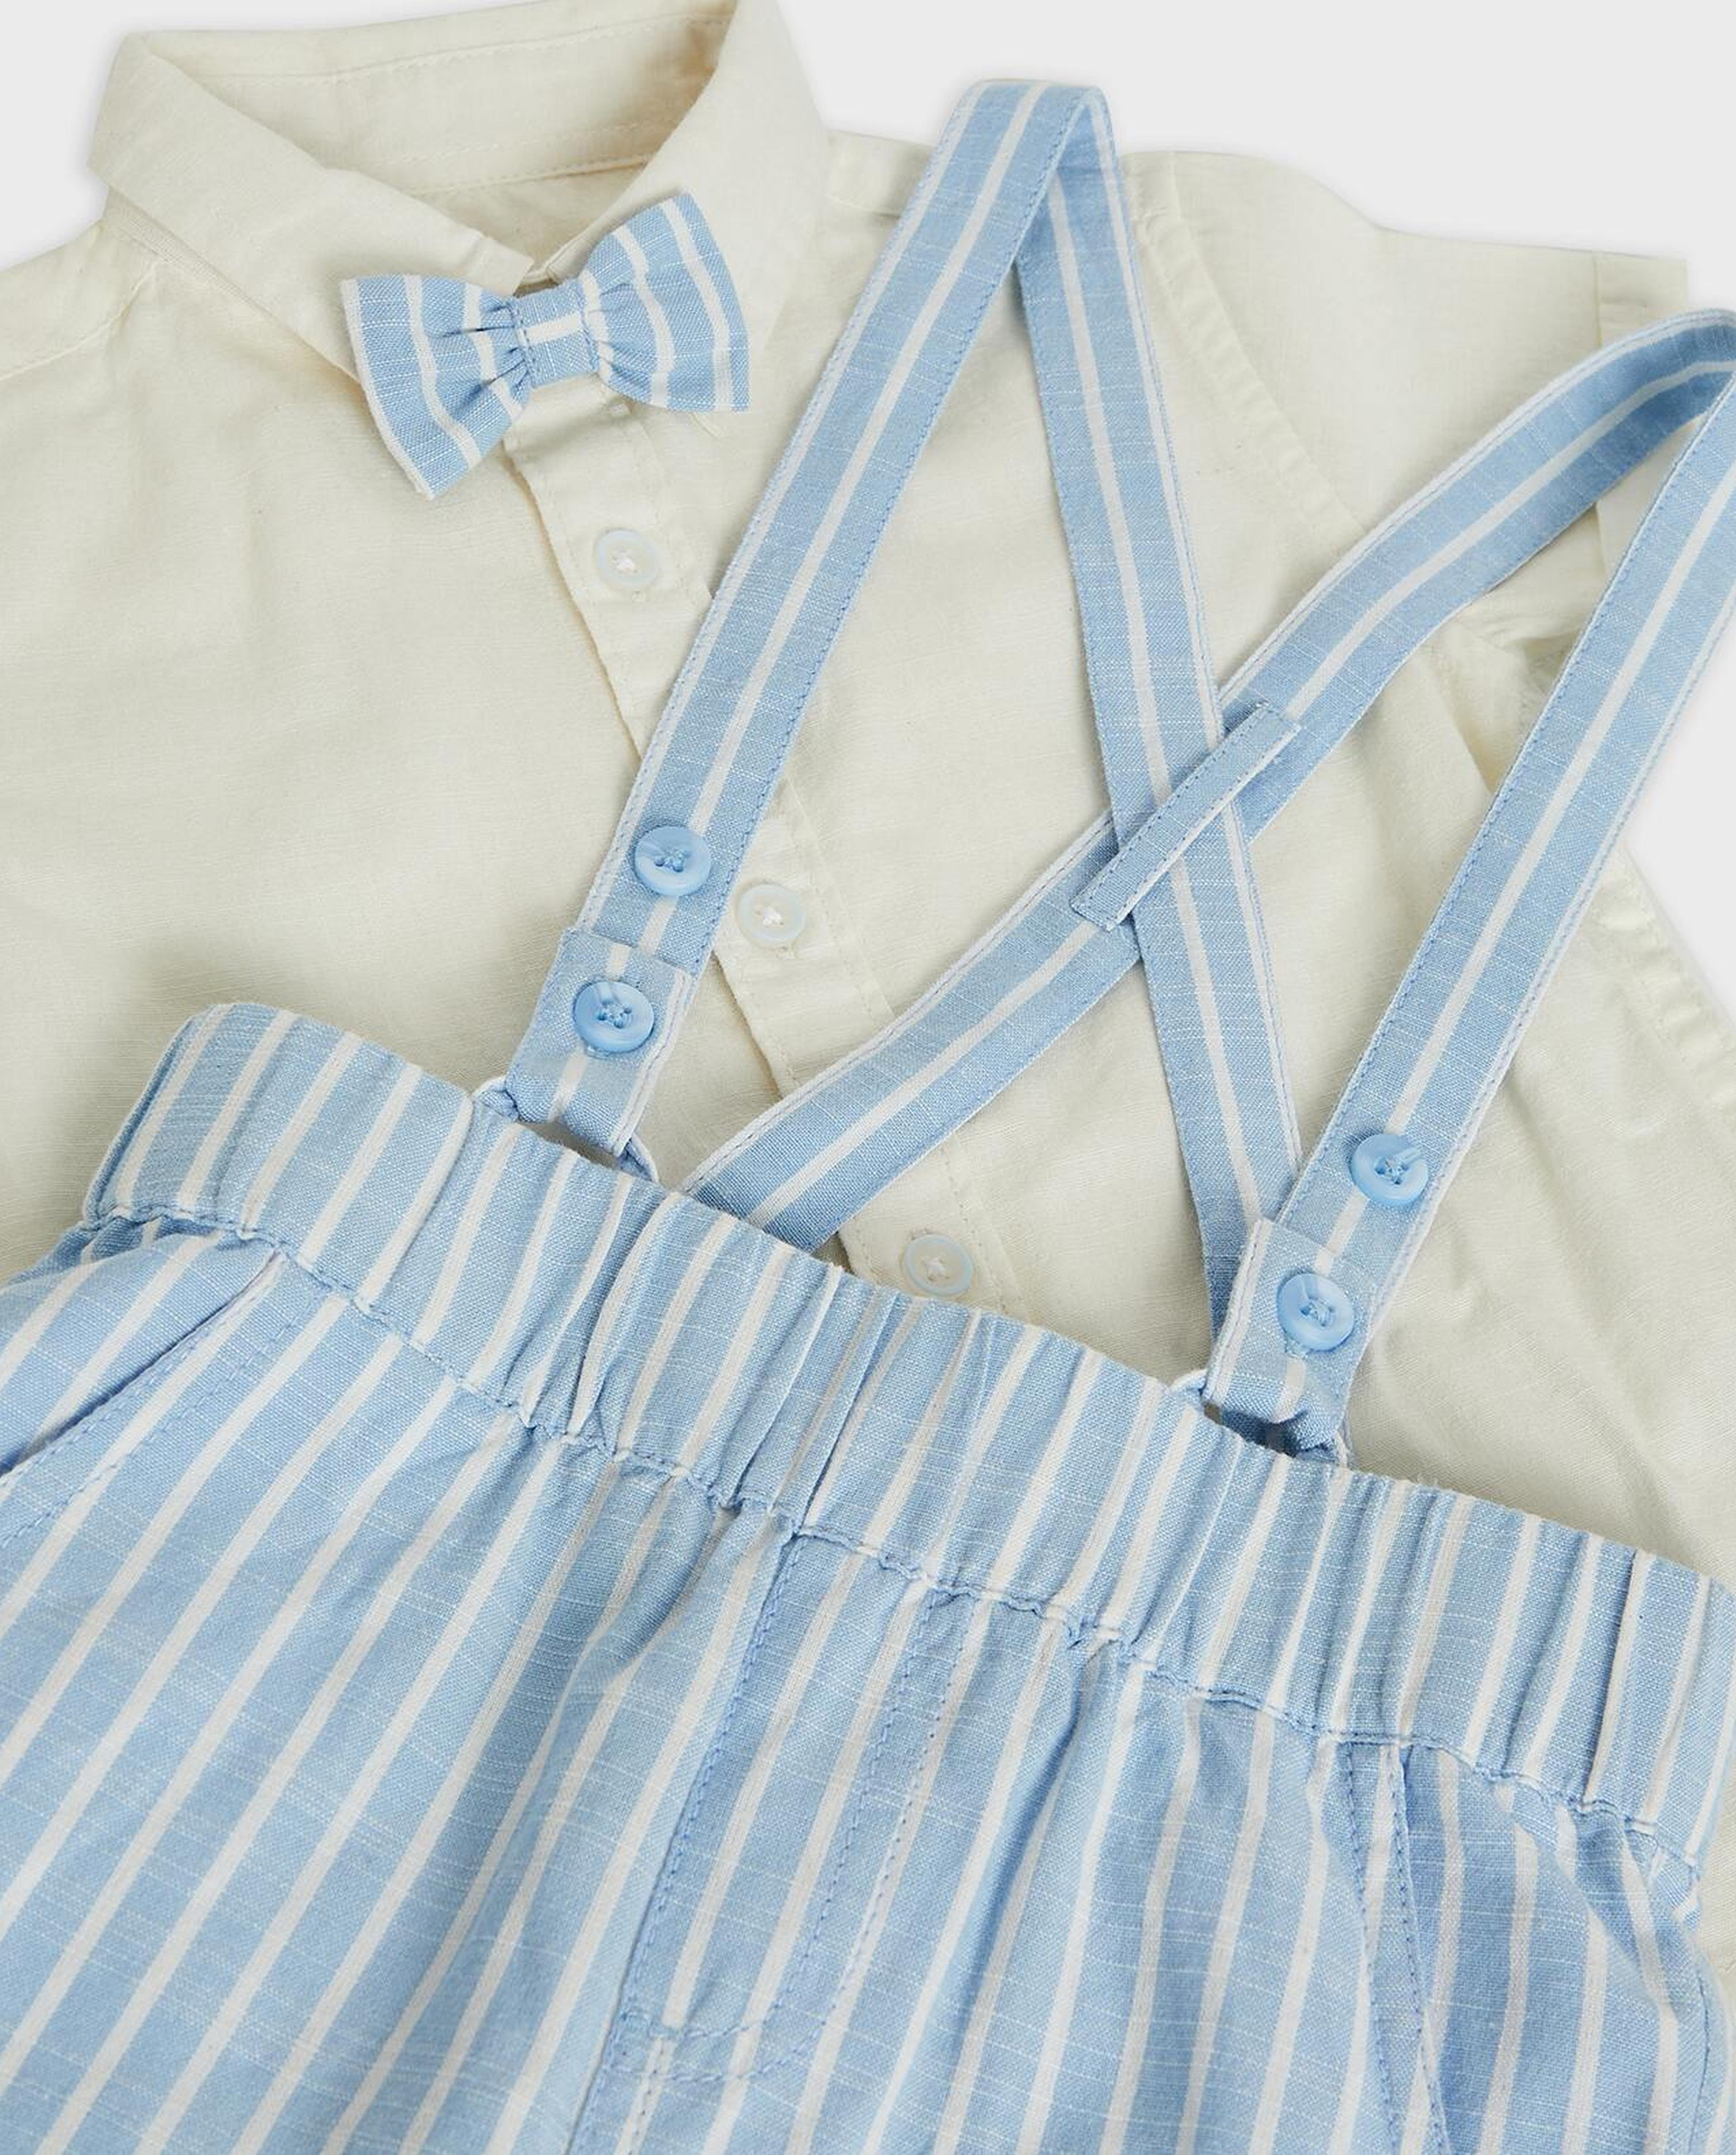 Solid Shirt and Striped Shorts with Suspenders